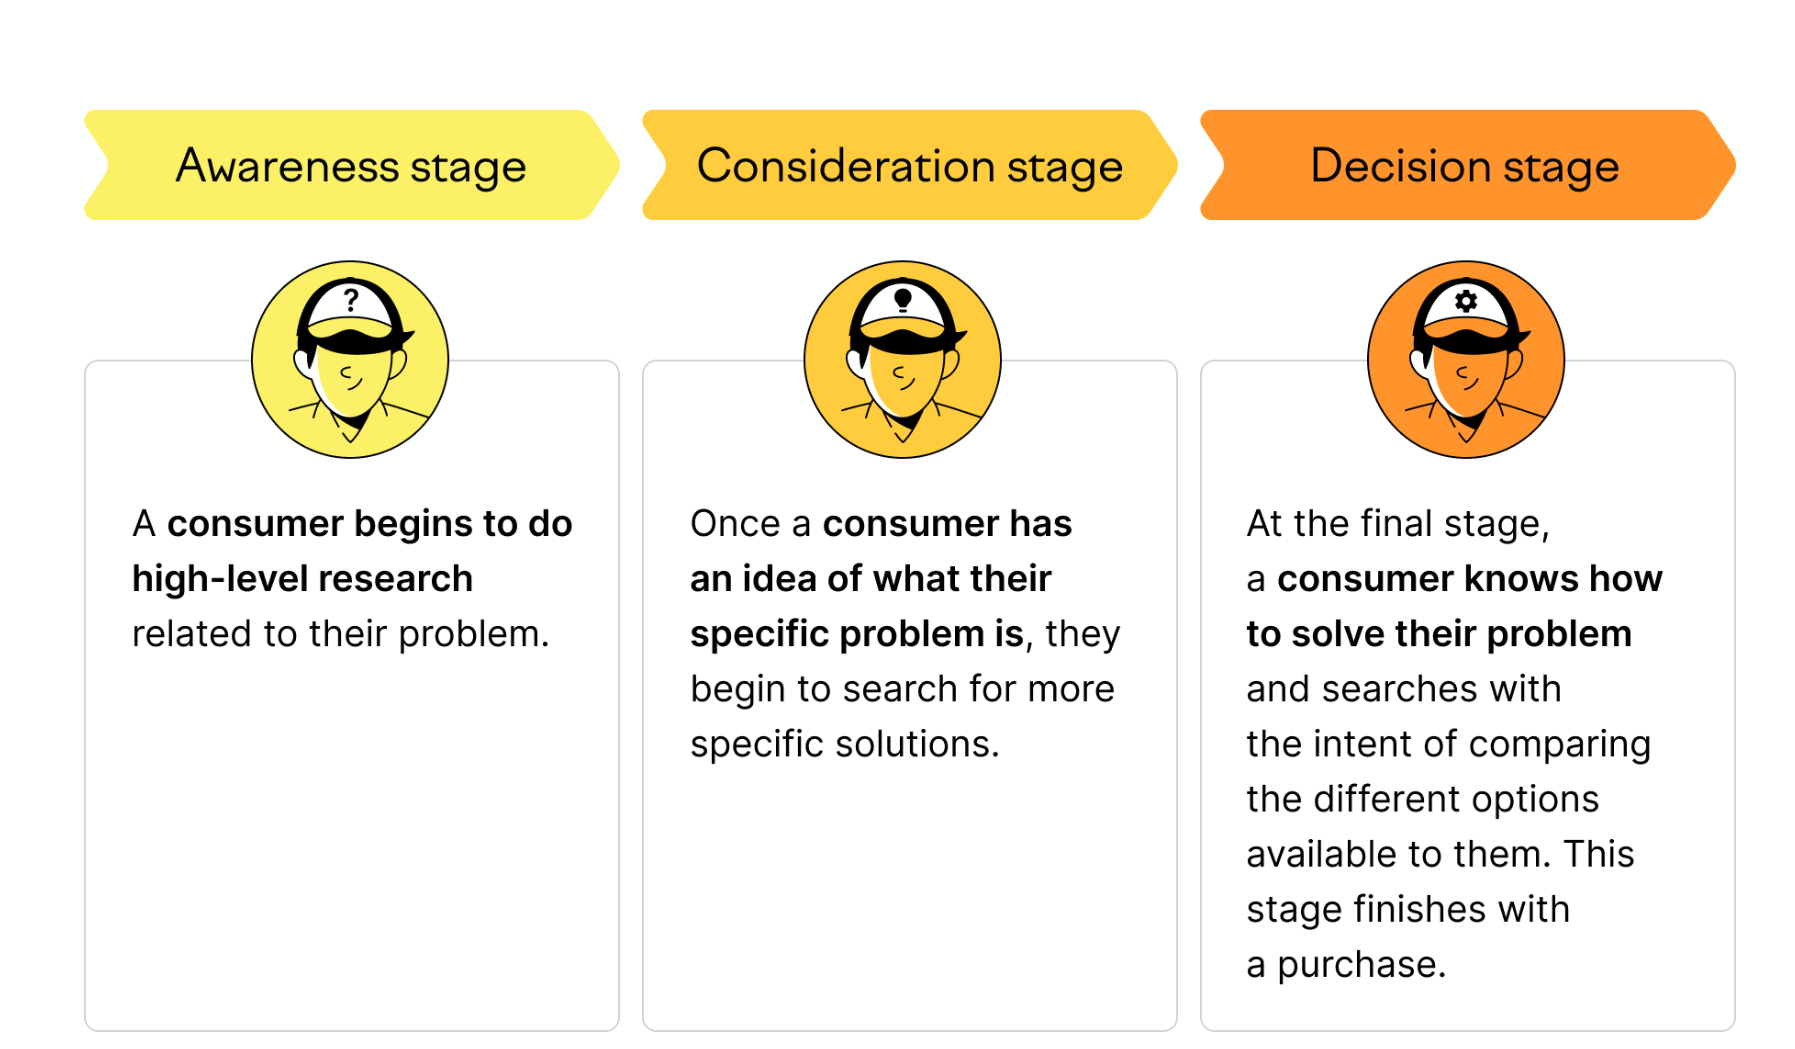 Your target audience's decision-making stages